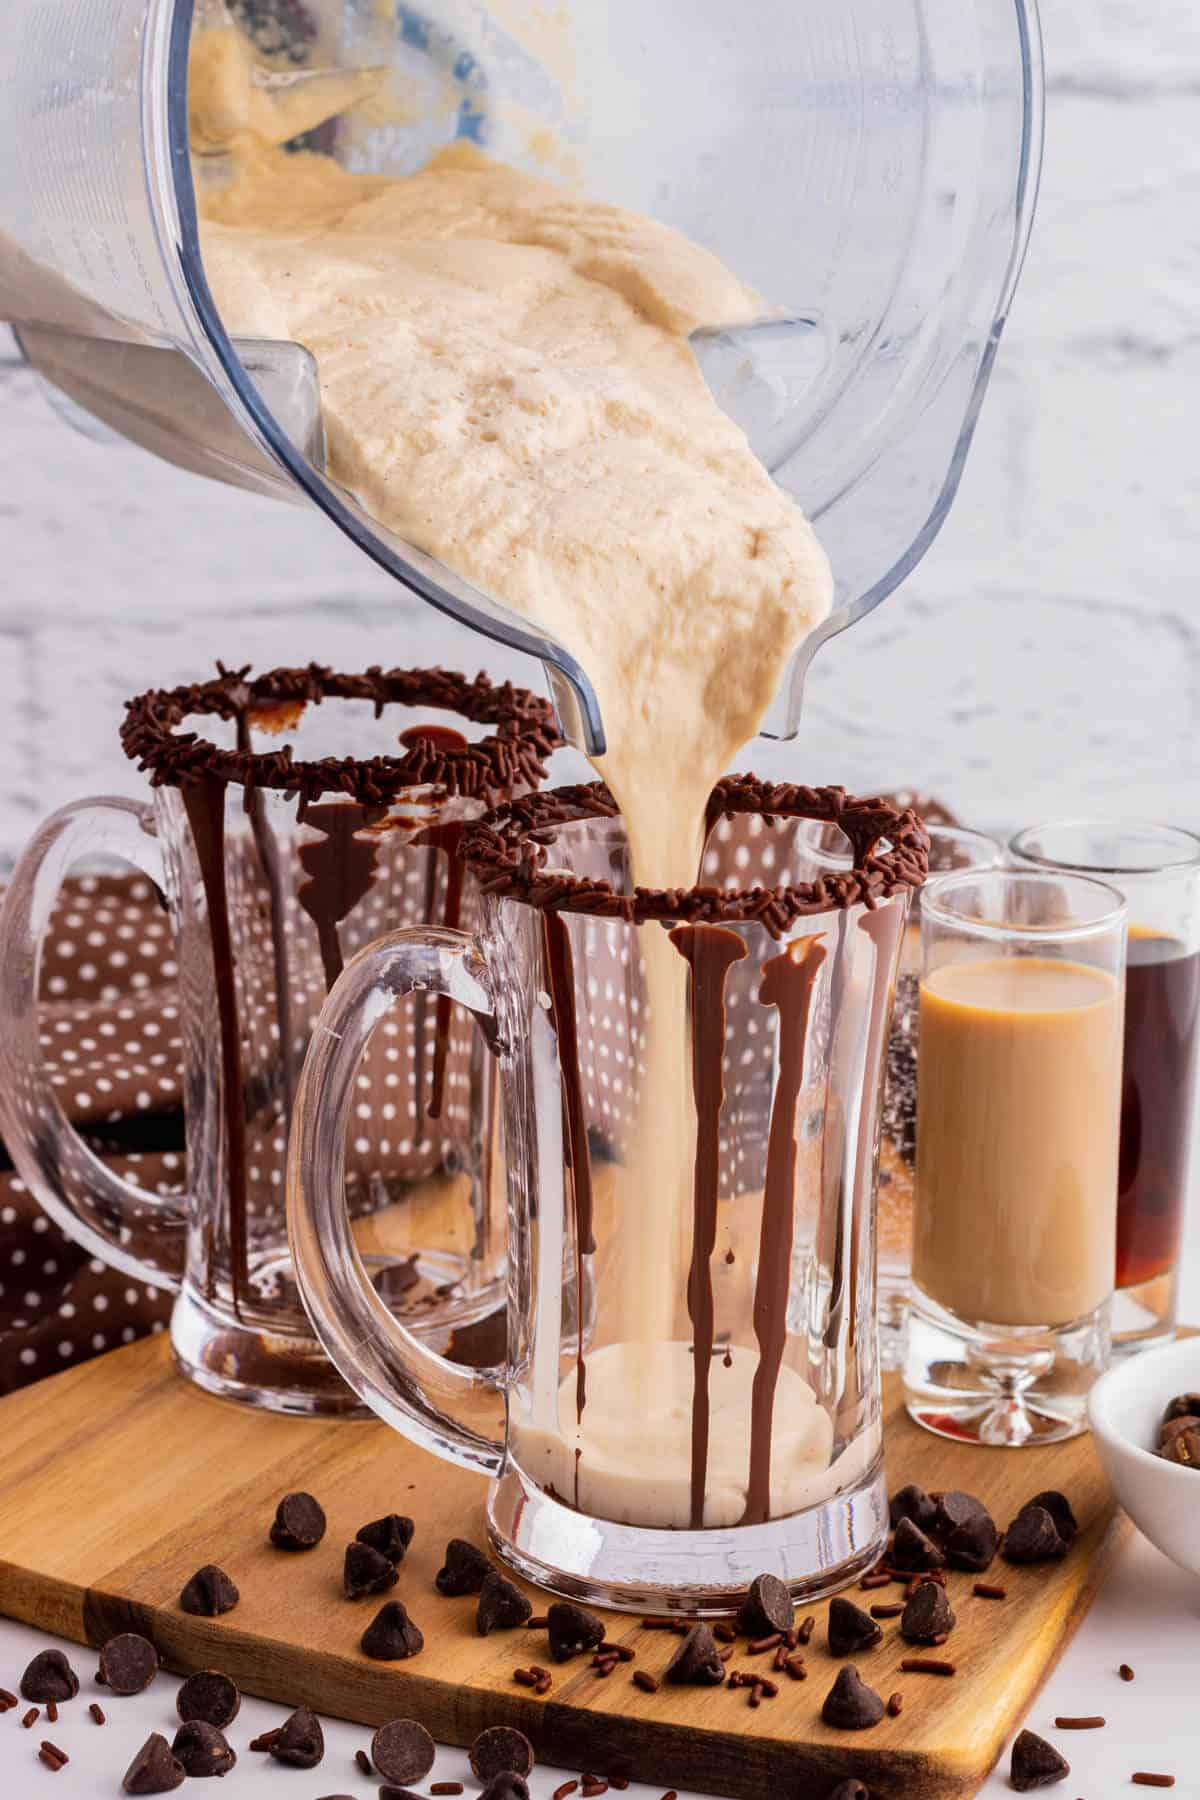 Chocolate mudslide being poured into a glass mug decorated with chocolate sauce.